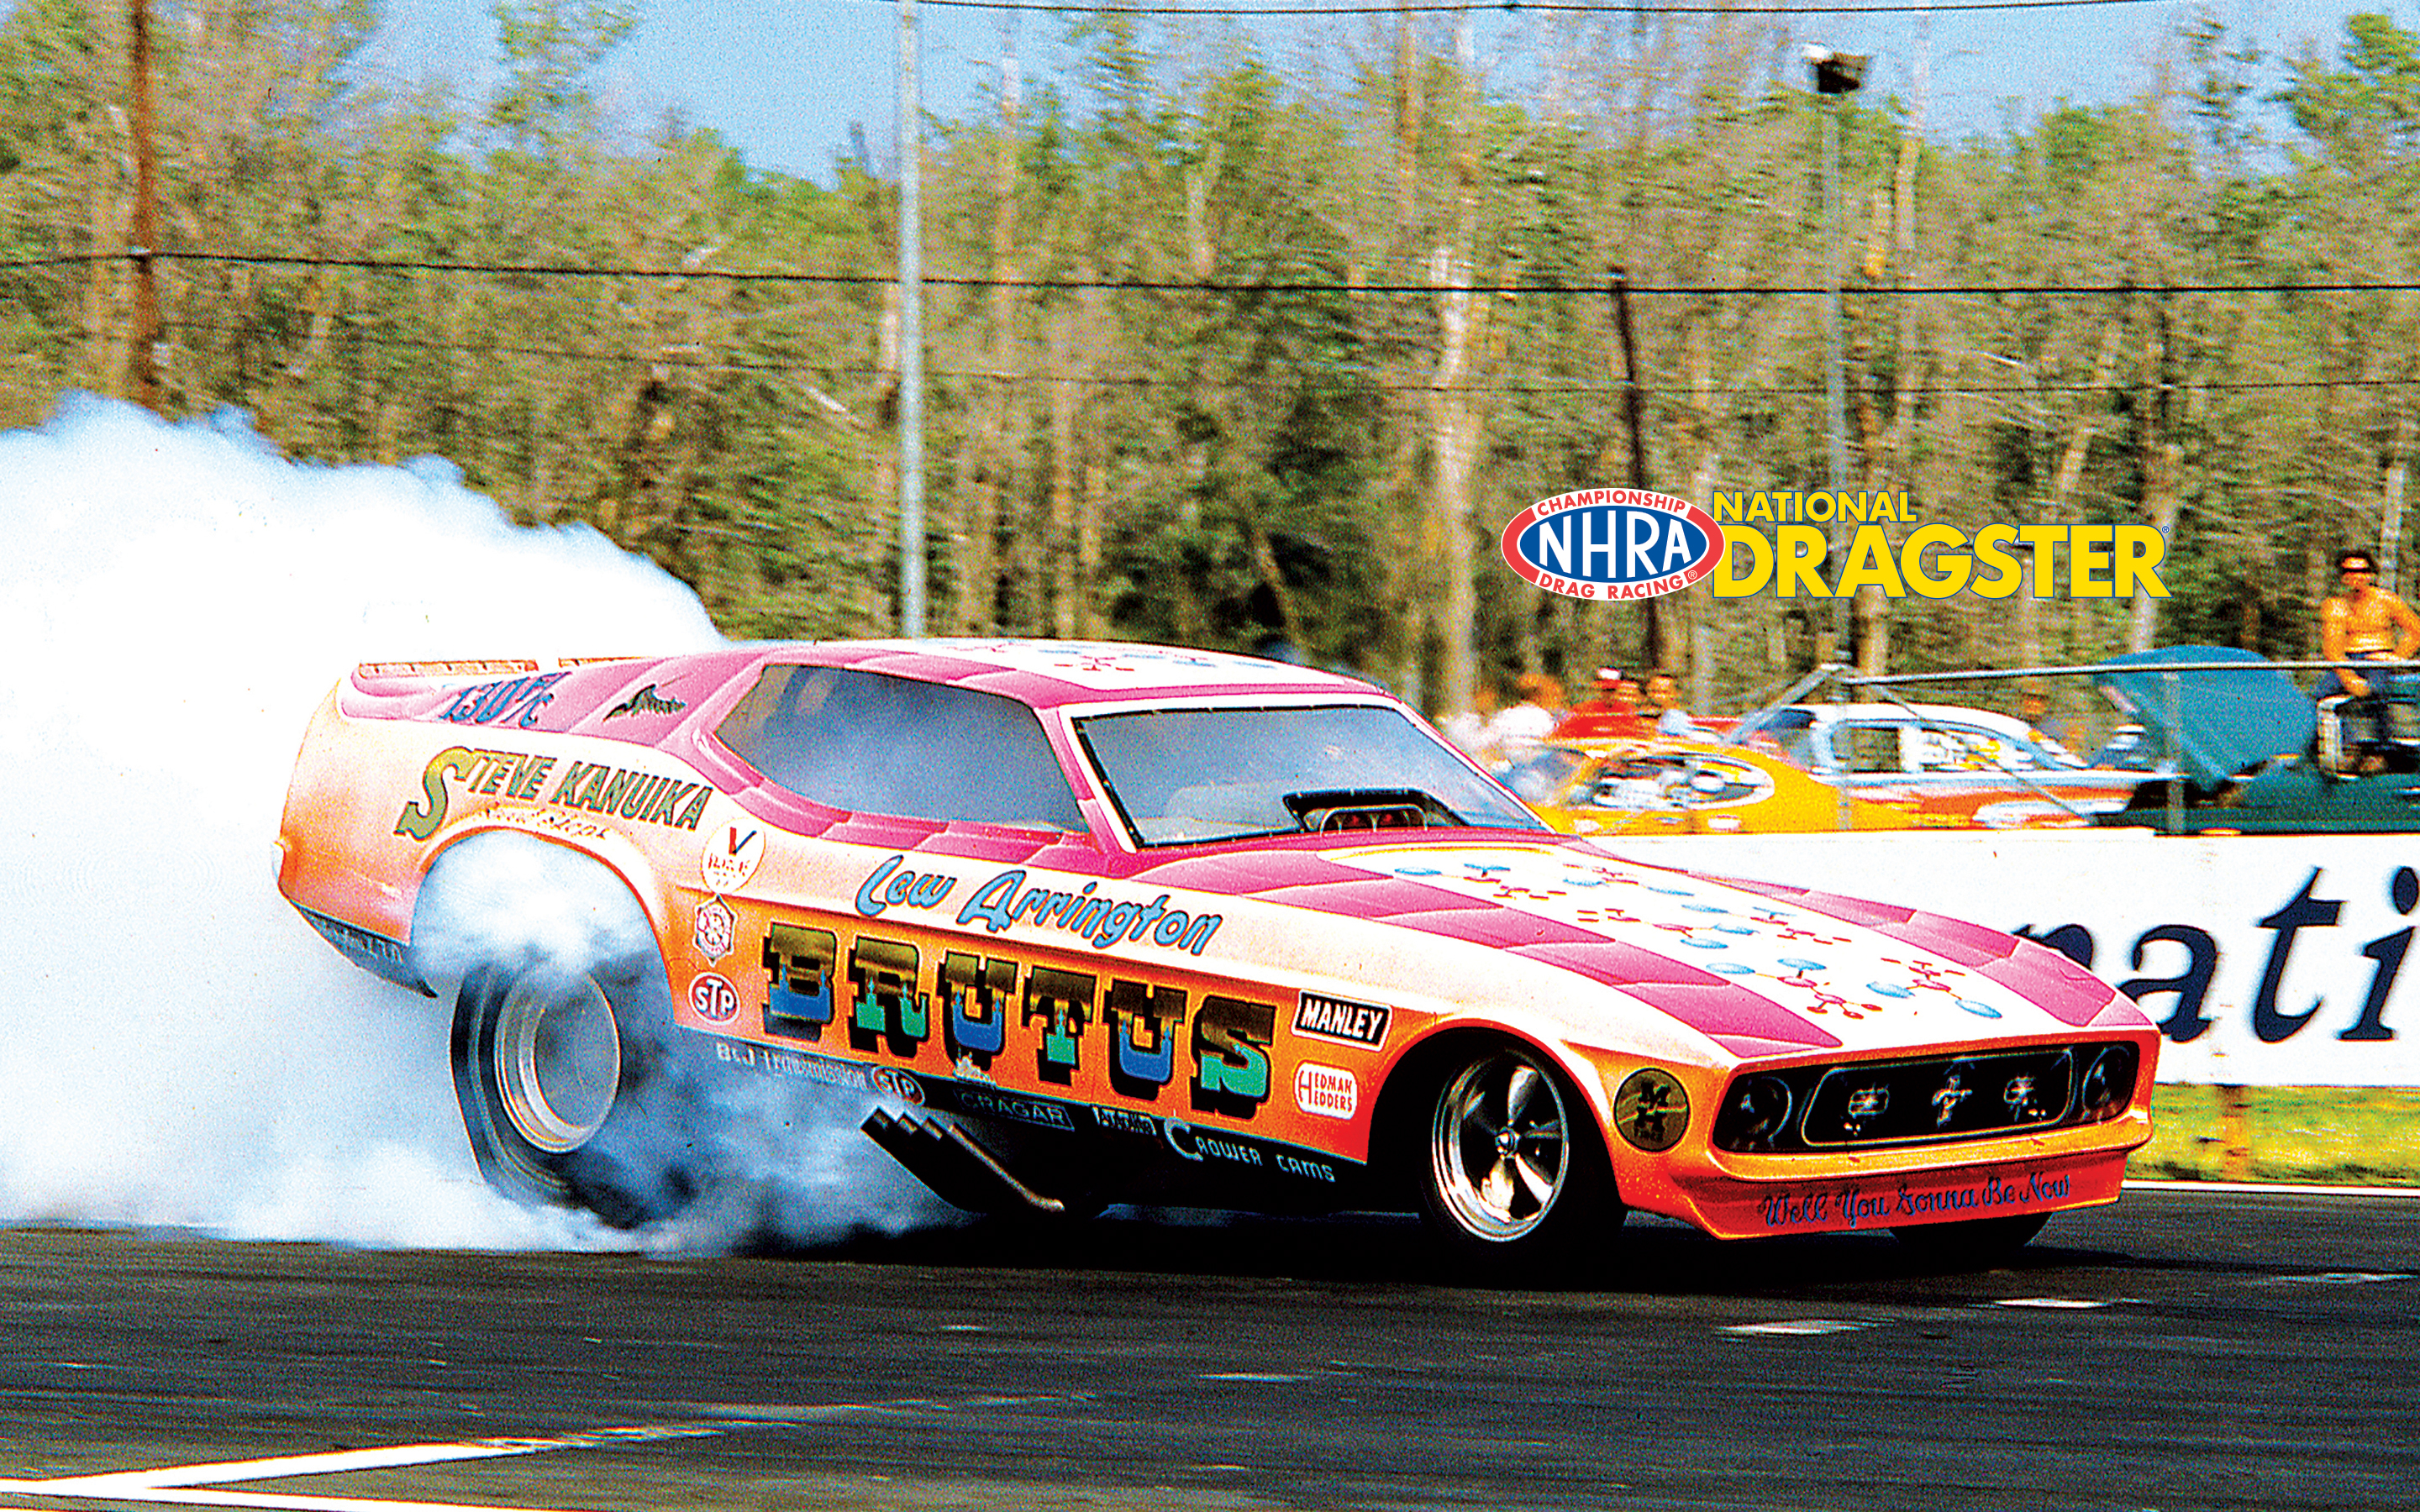 2880x1800 NHRA National Dragster wallpaper images (Issue 08, 2020) | NHRA